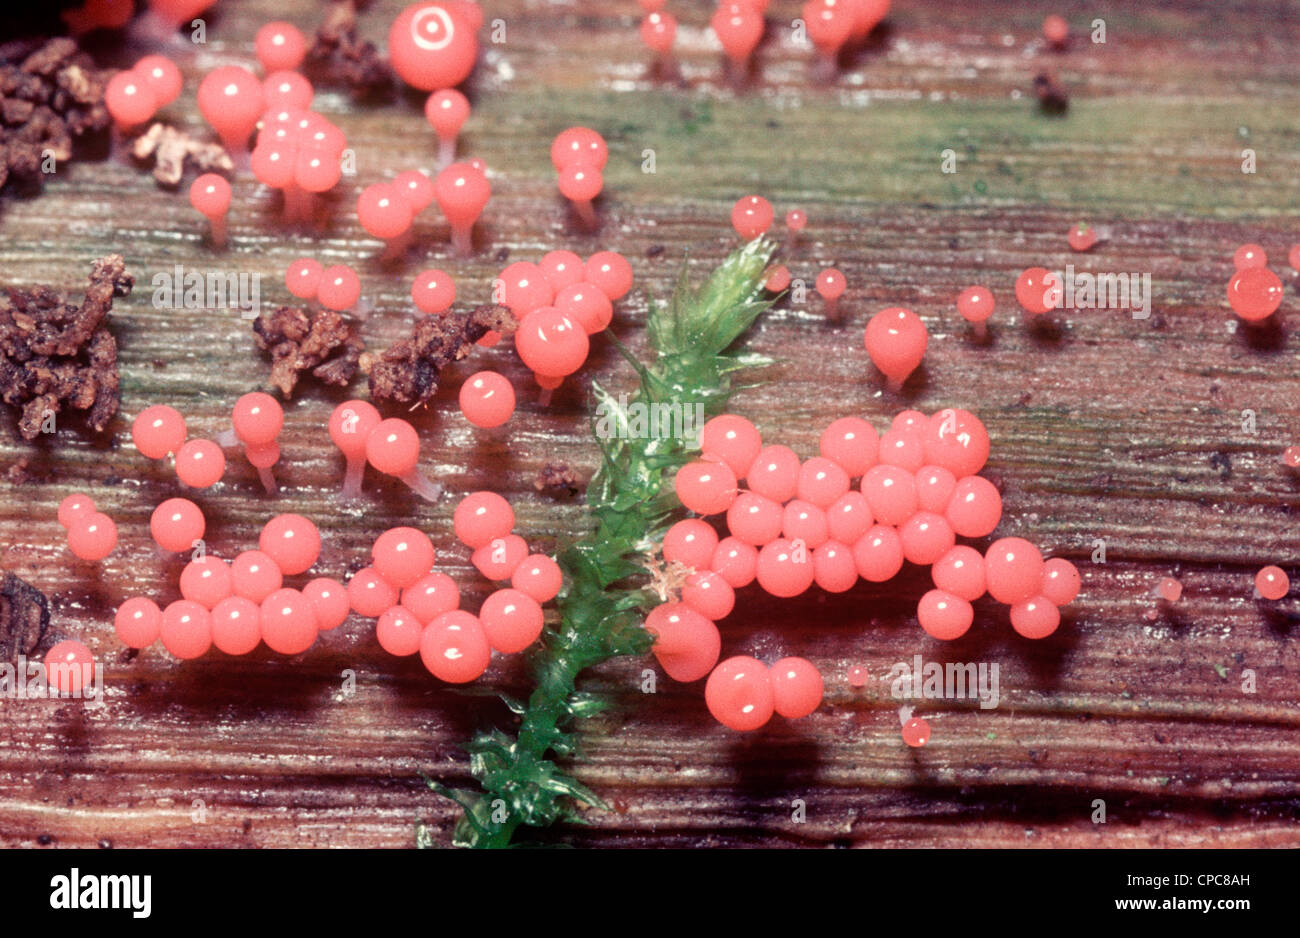 Slime mould (Trichia decipiens) fruiting bodies on a log UK Stock Photo